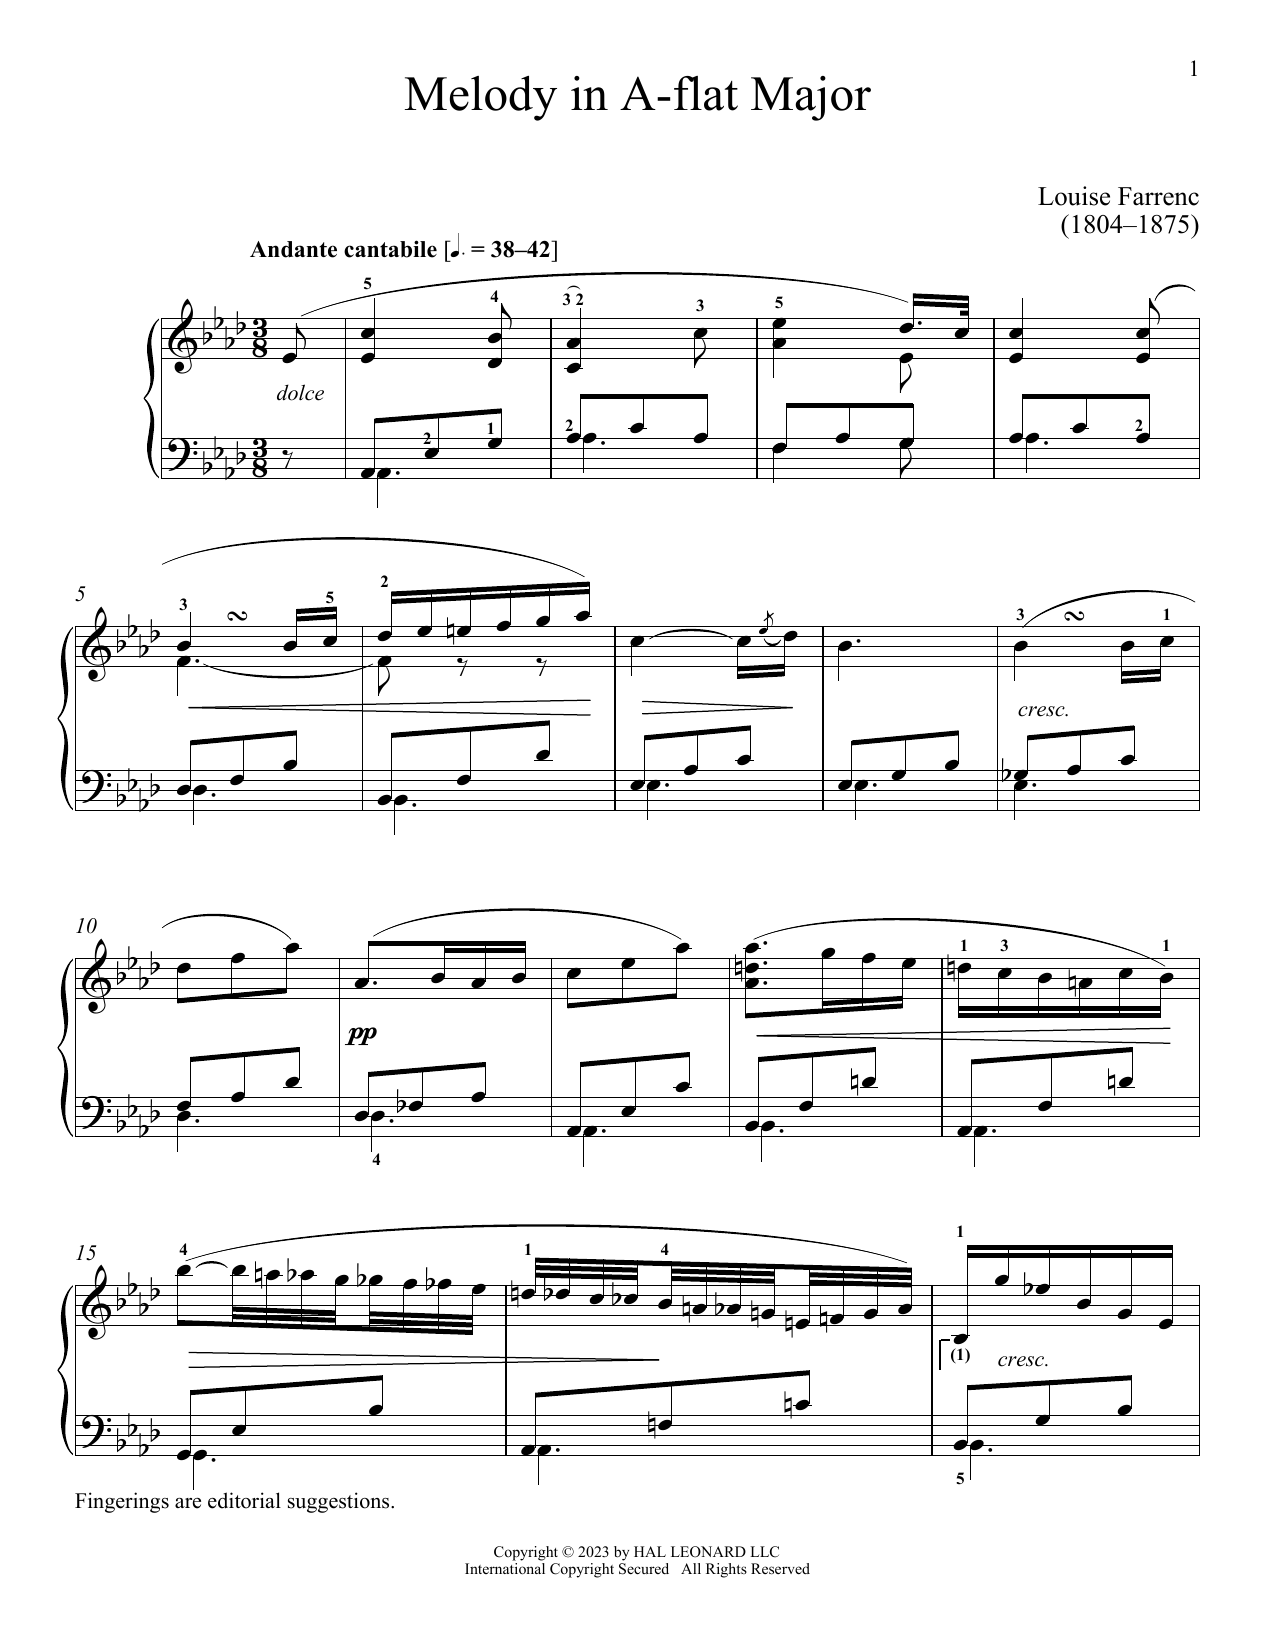 Download Louise Dumont Farrenc Melody in A-flat Major Sheet Music